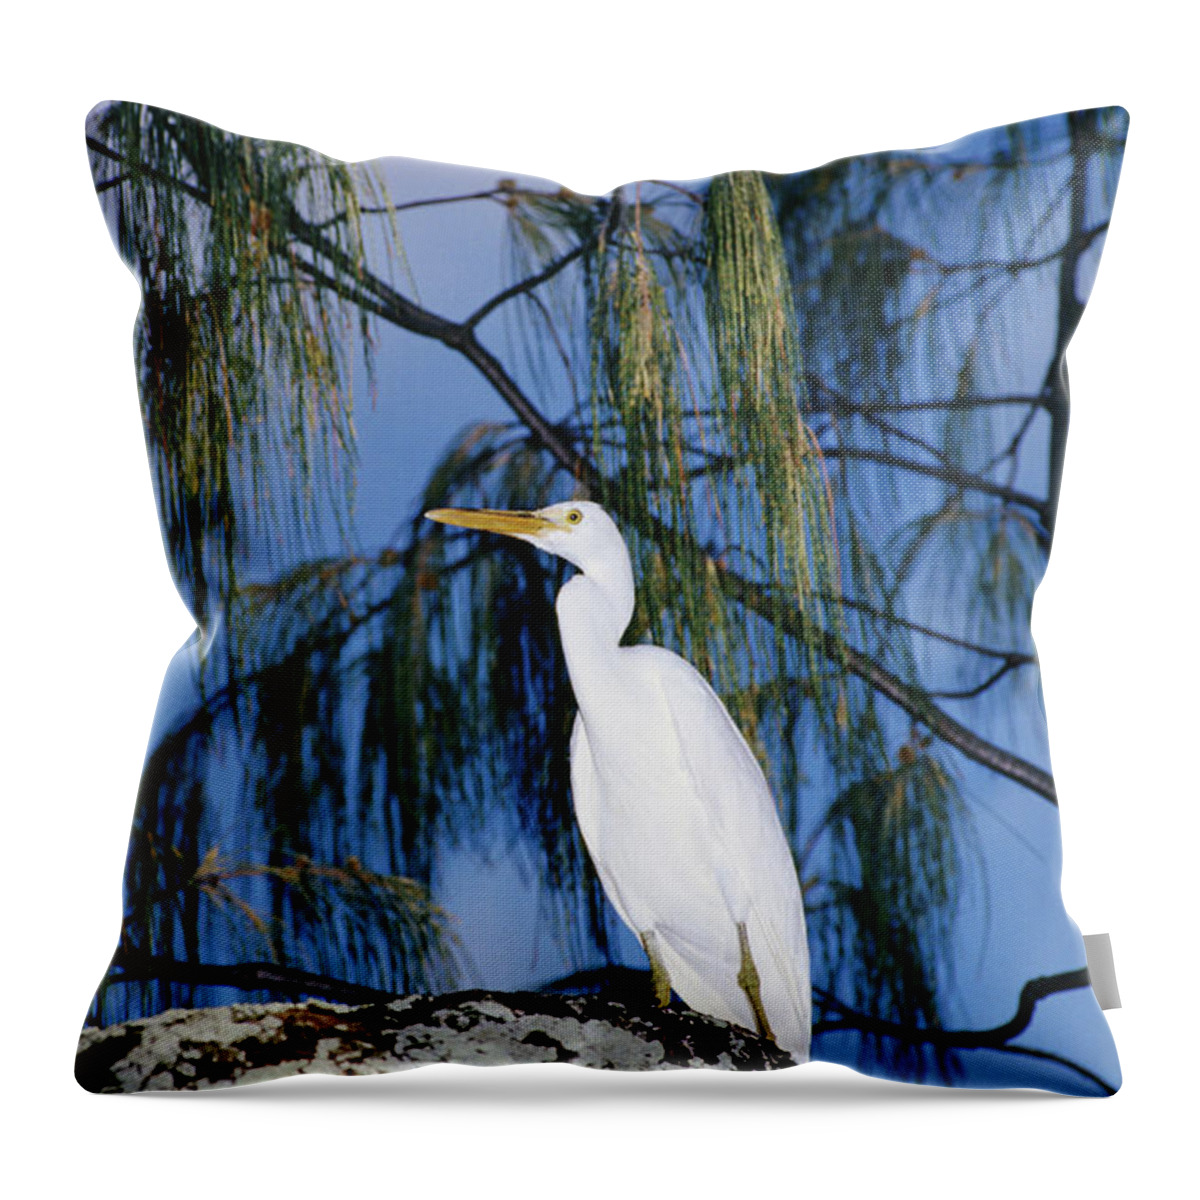 Sharp Throw Pillow featuring the photograph Reef Egret In Tree by Holger Leue